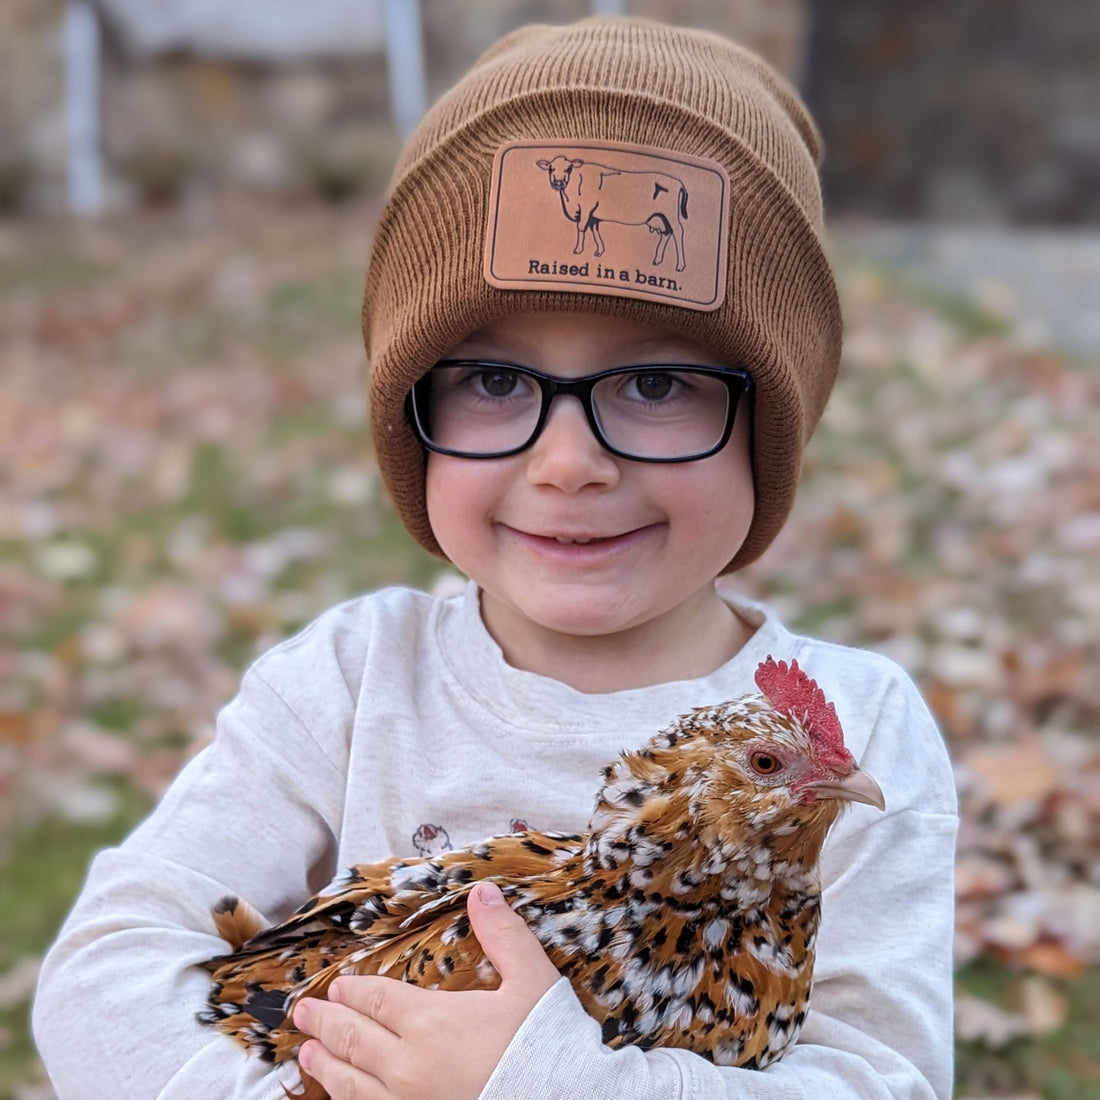 Feathered Classmates: Why This Homeschool Family Chose Chickens